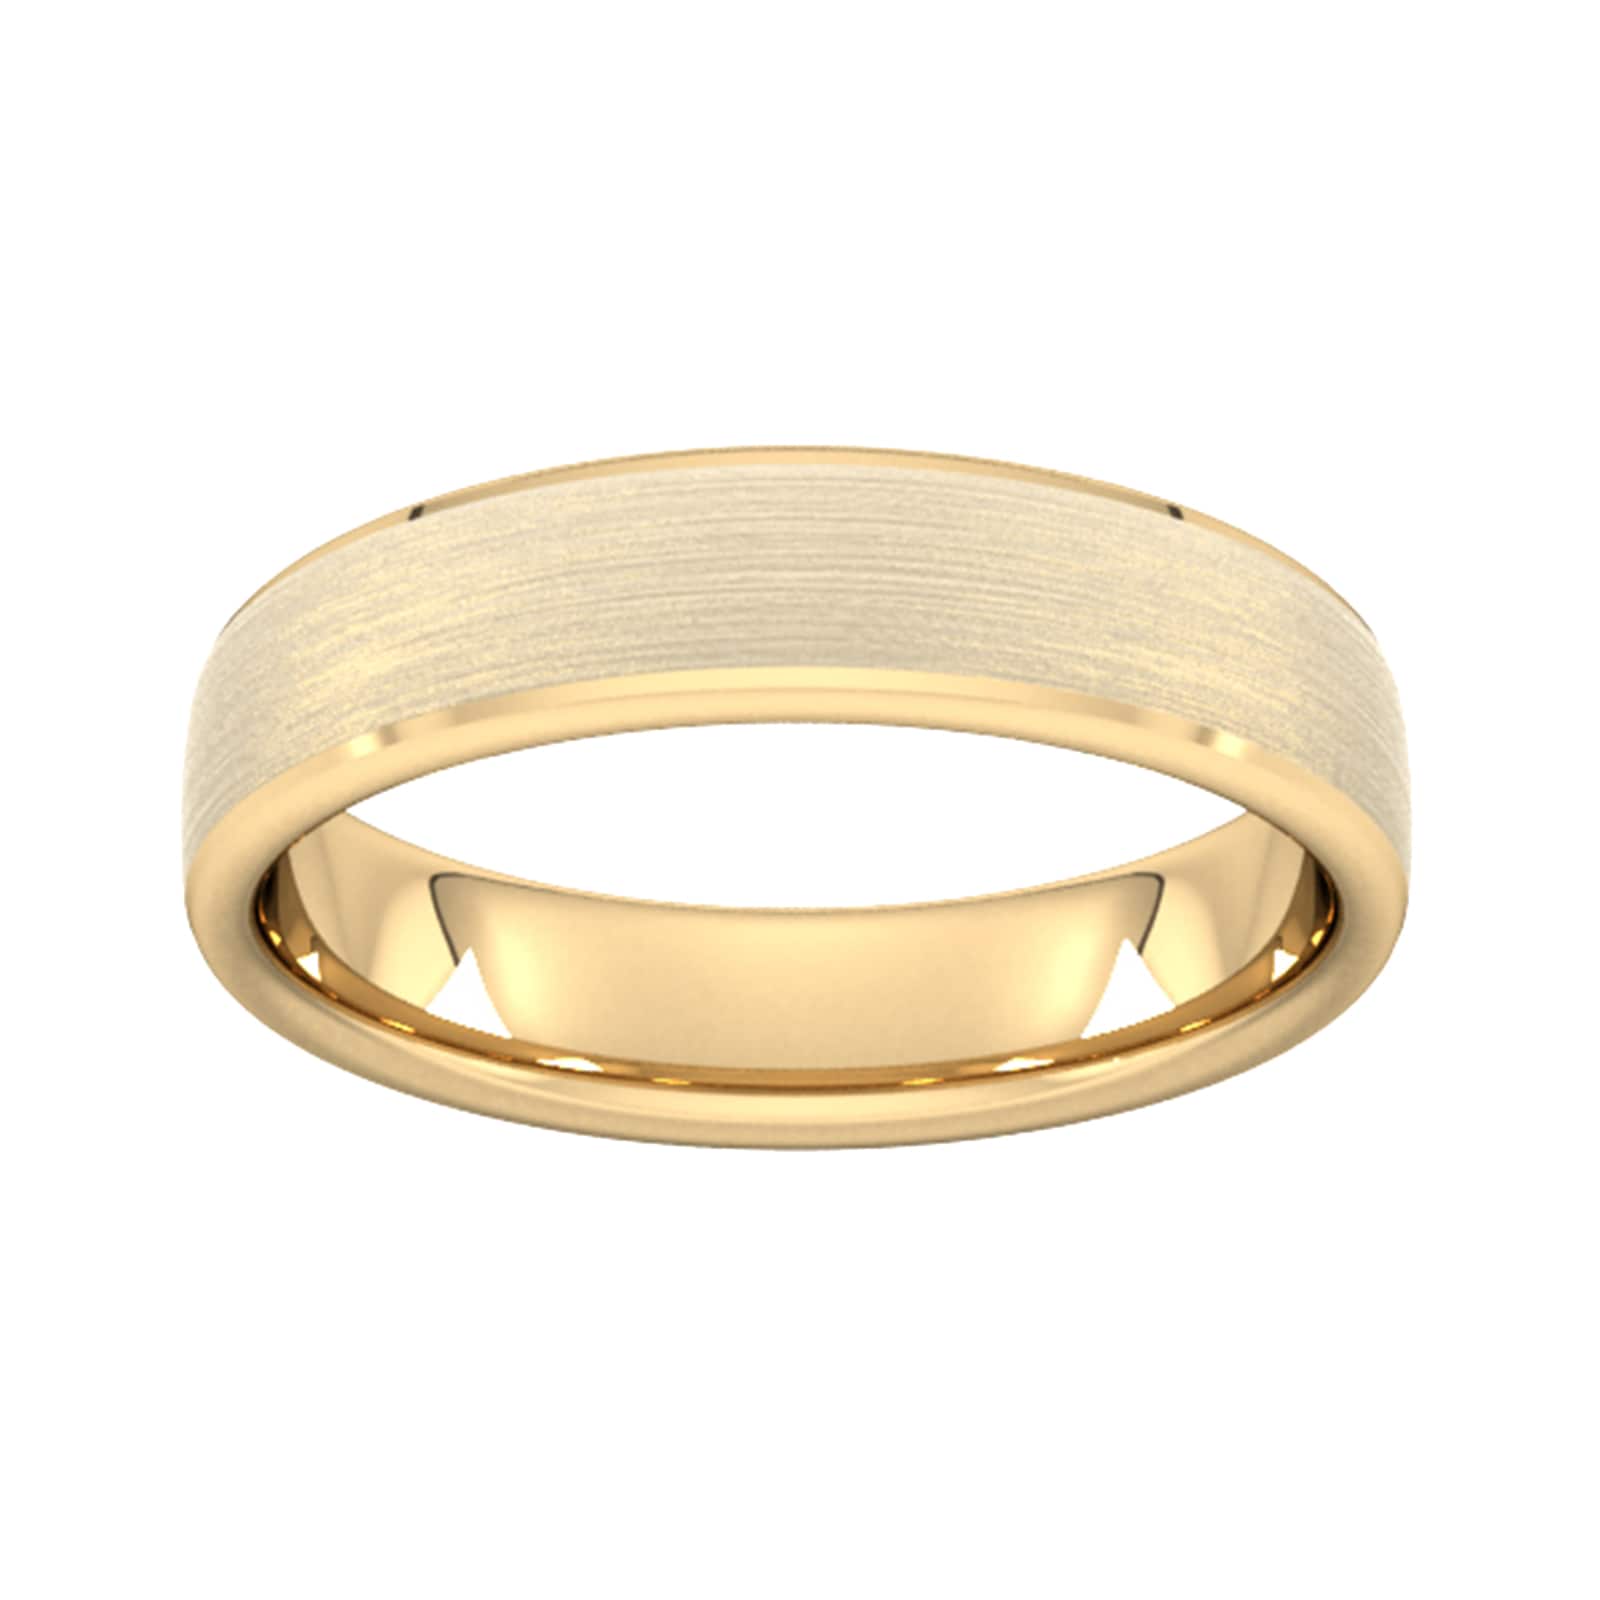 5mm D Shape Standard Polished Chamfered Edges With Matt Centre Wedding Ring In 9 Carat Yellow Gold - Ring Size L